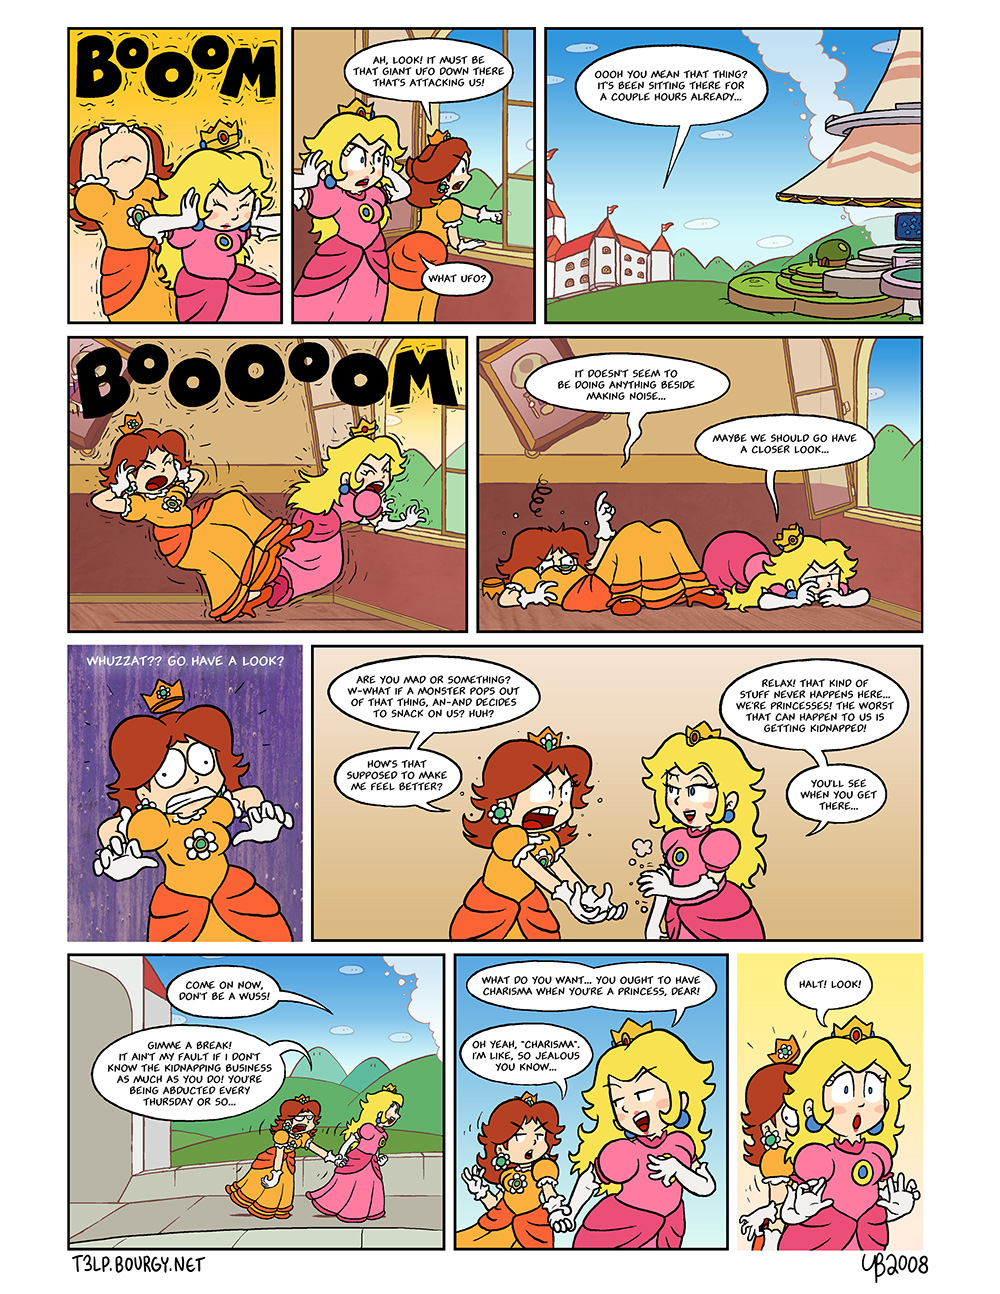 Part 1 – Page 2